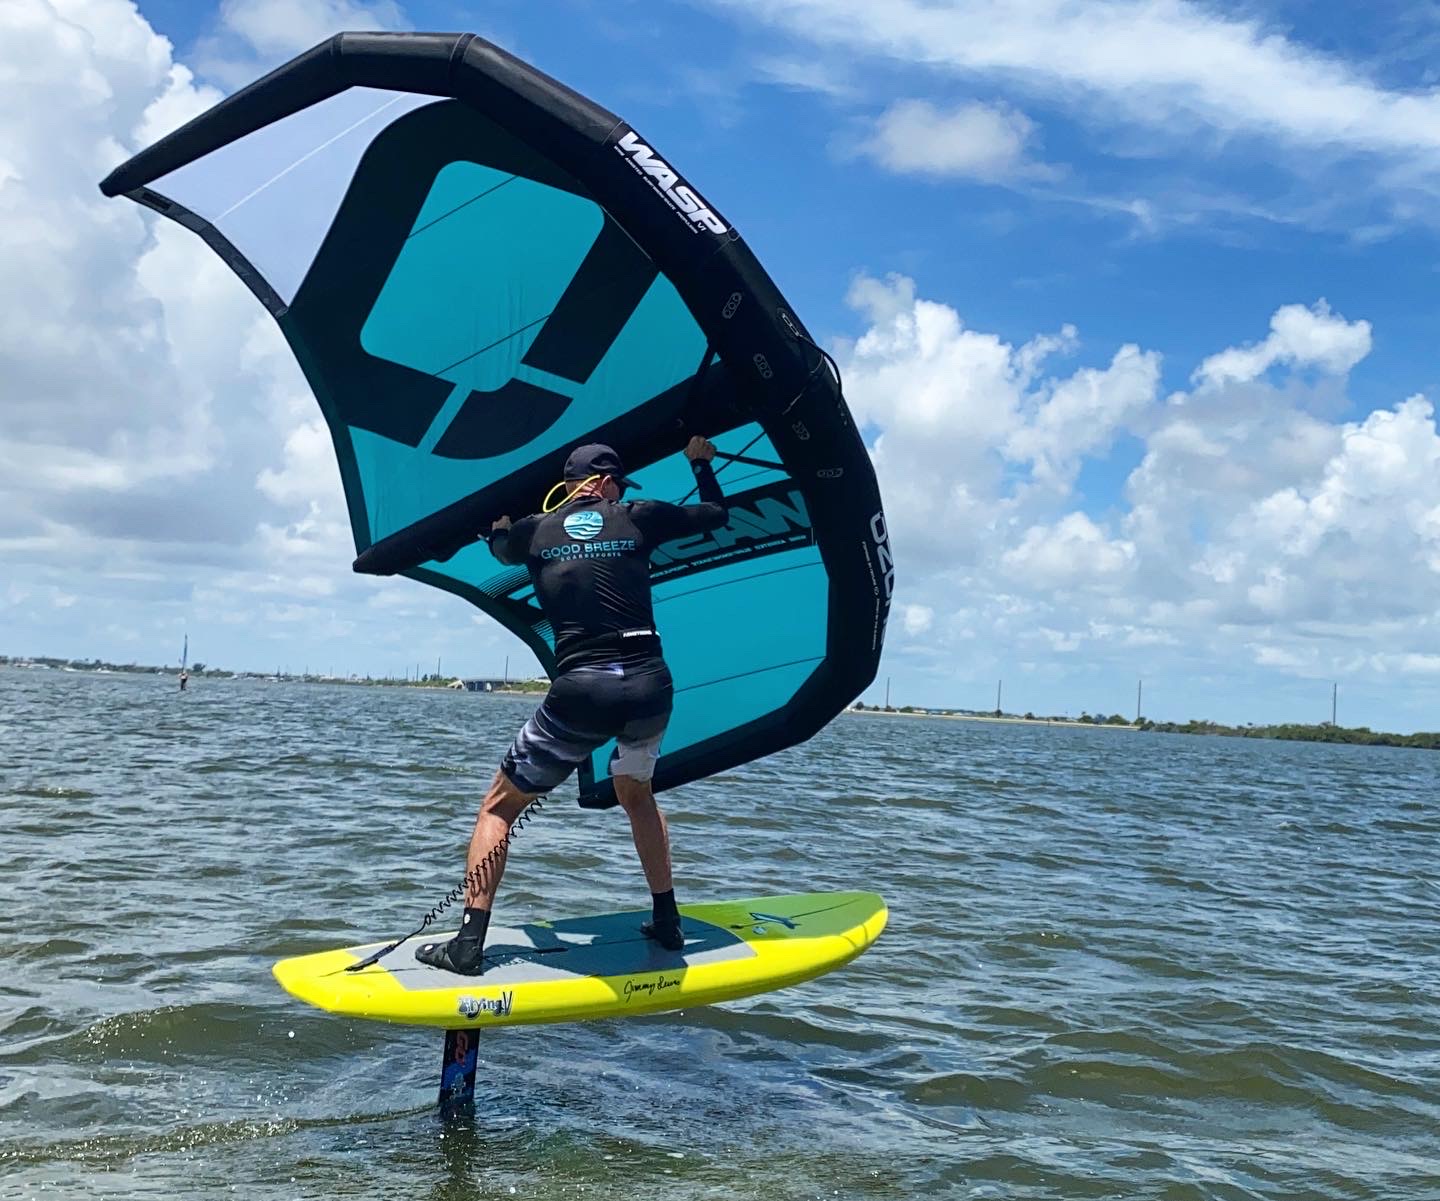 Handheld Wing Foil Kite Foil Wing Kite Surfing Inflatable Wing